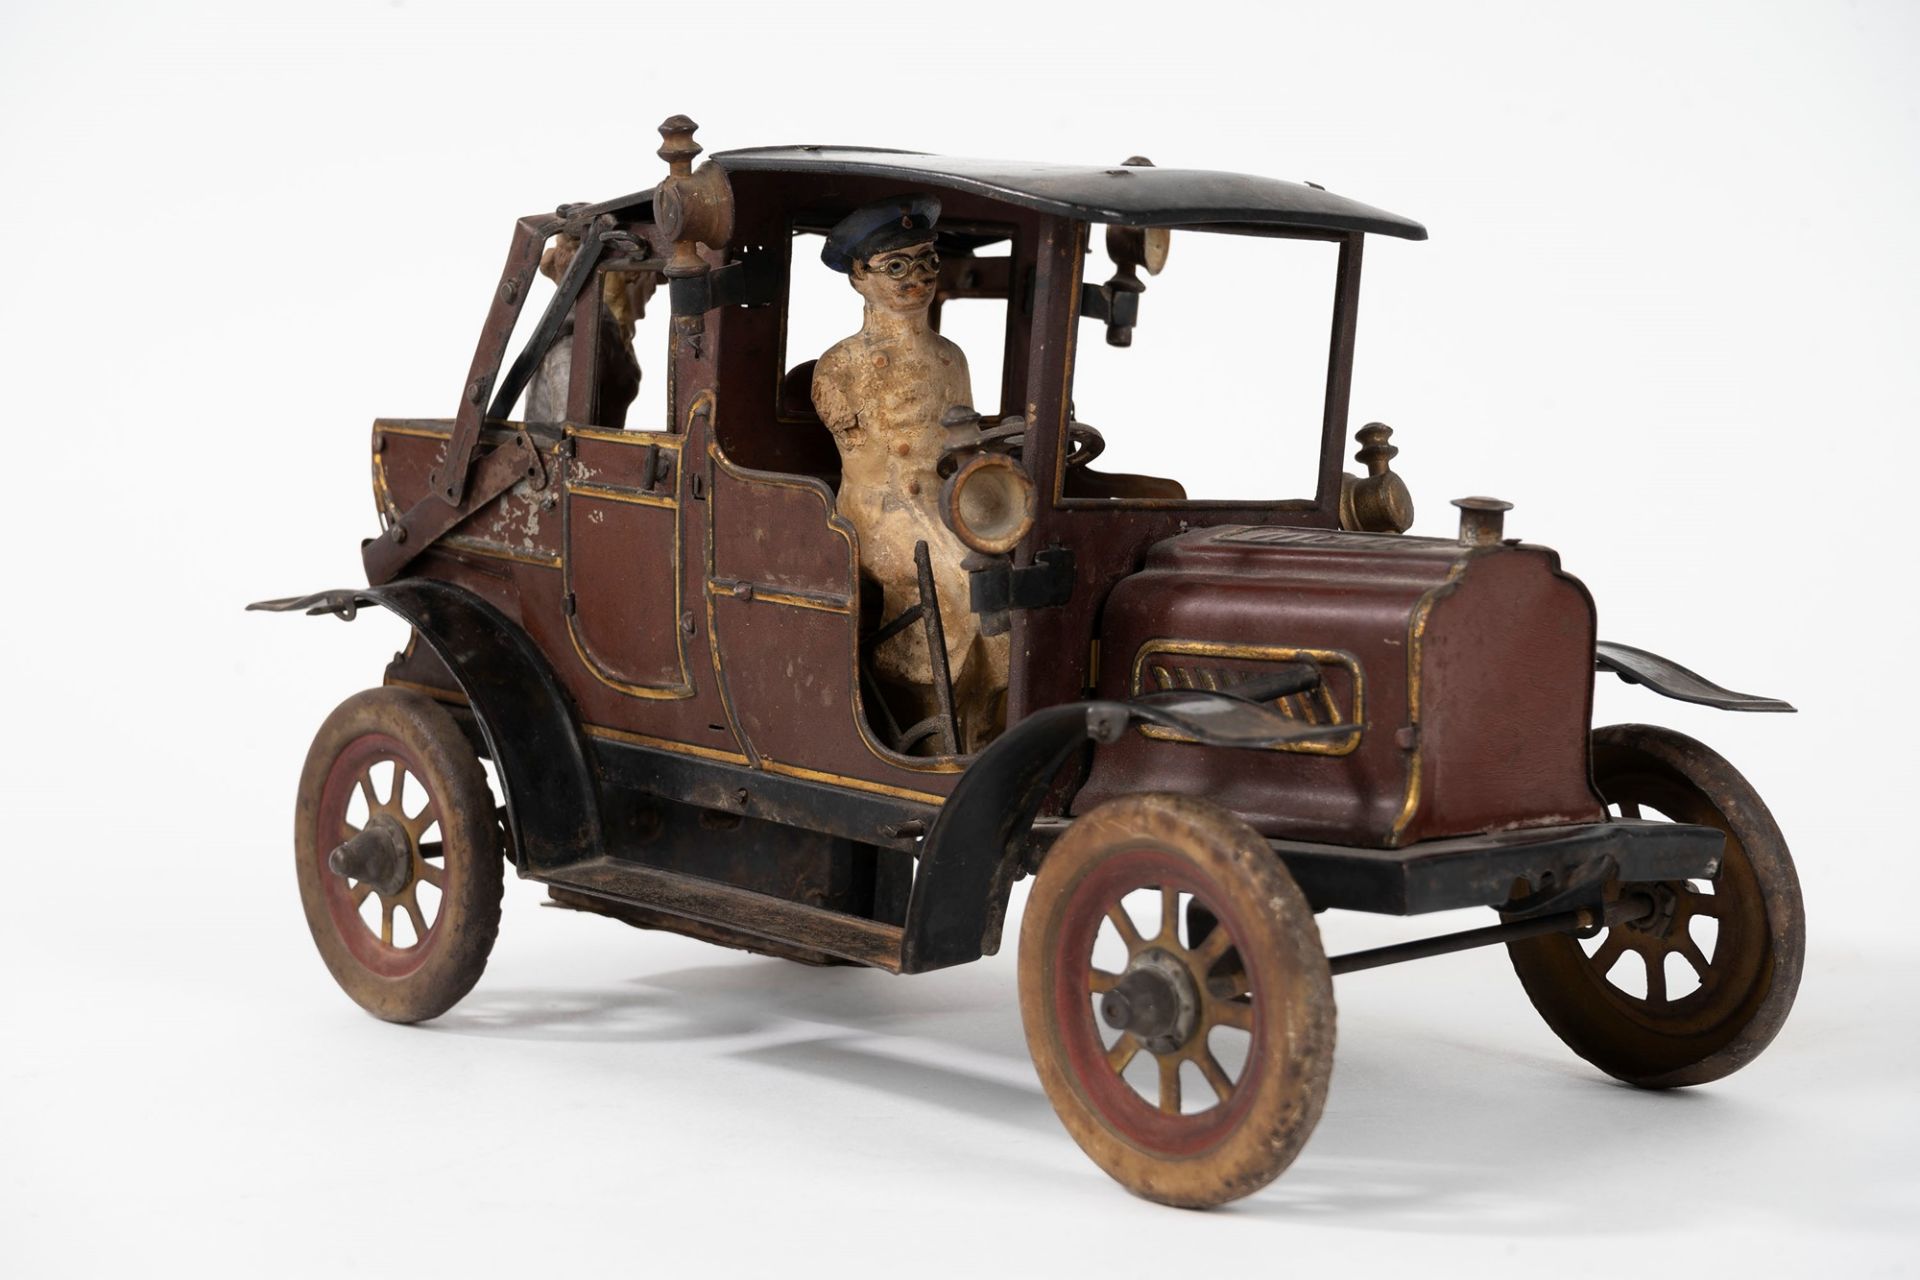 Tin toy car, early 20th century - Image 2 of 4